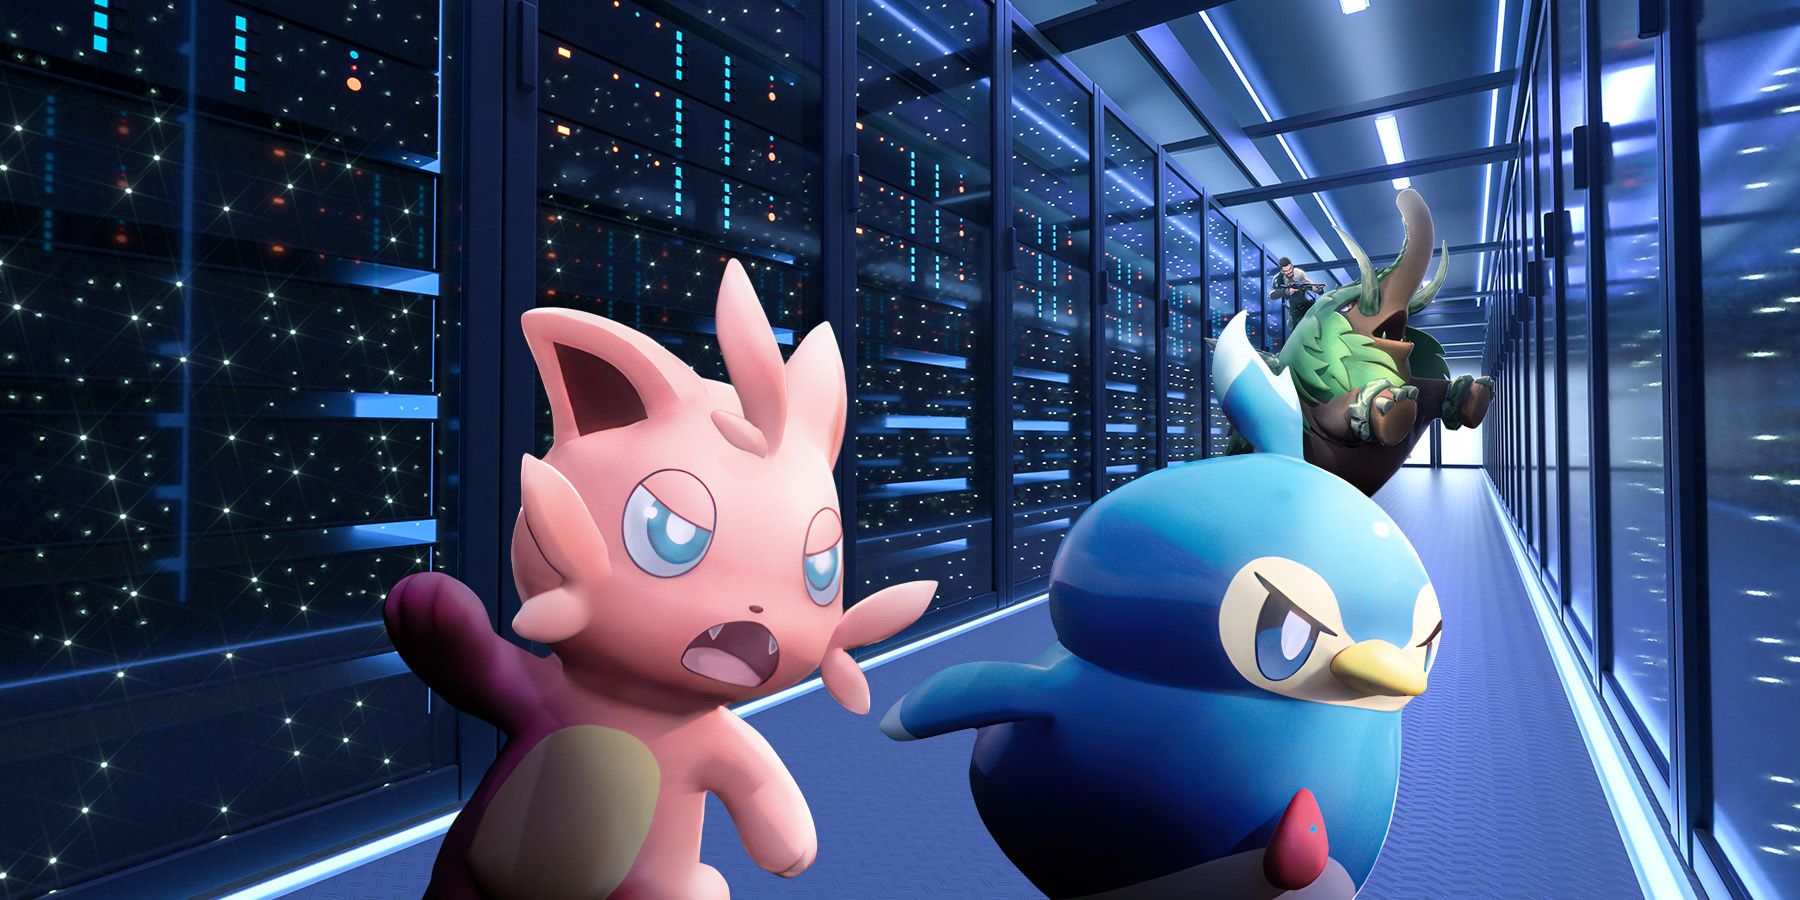 Palworld Cattiva and Pengullet Pals running through server room composite